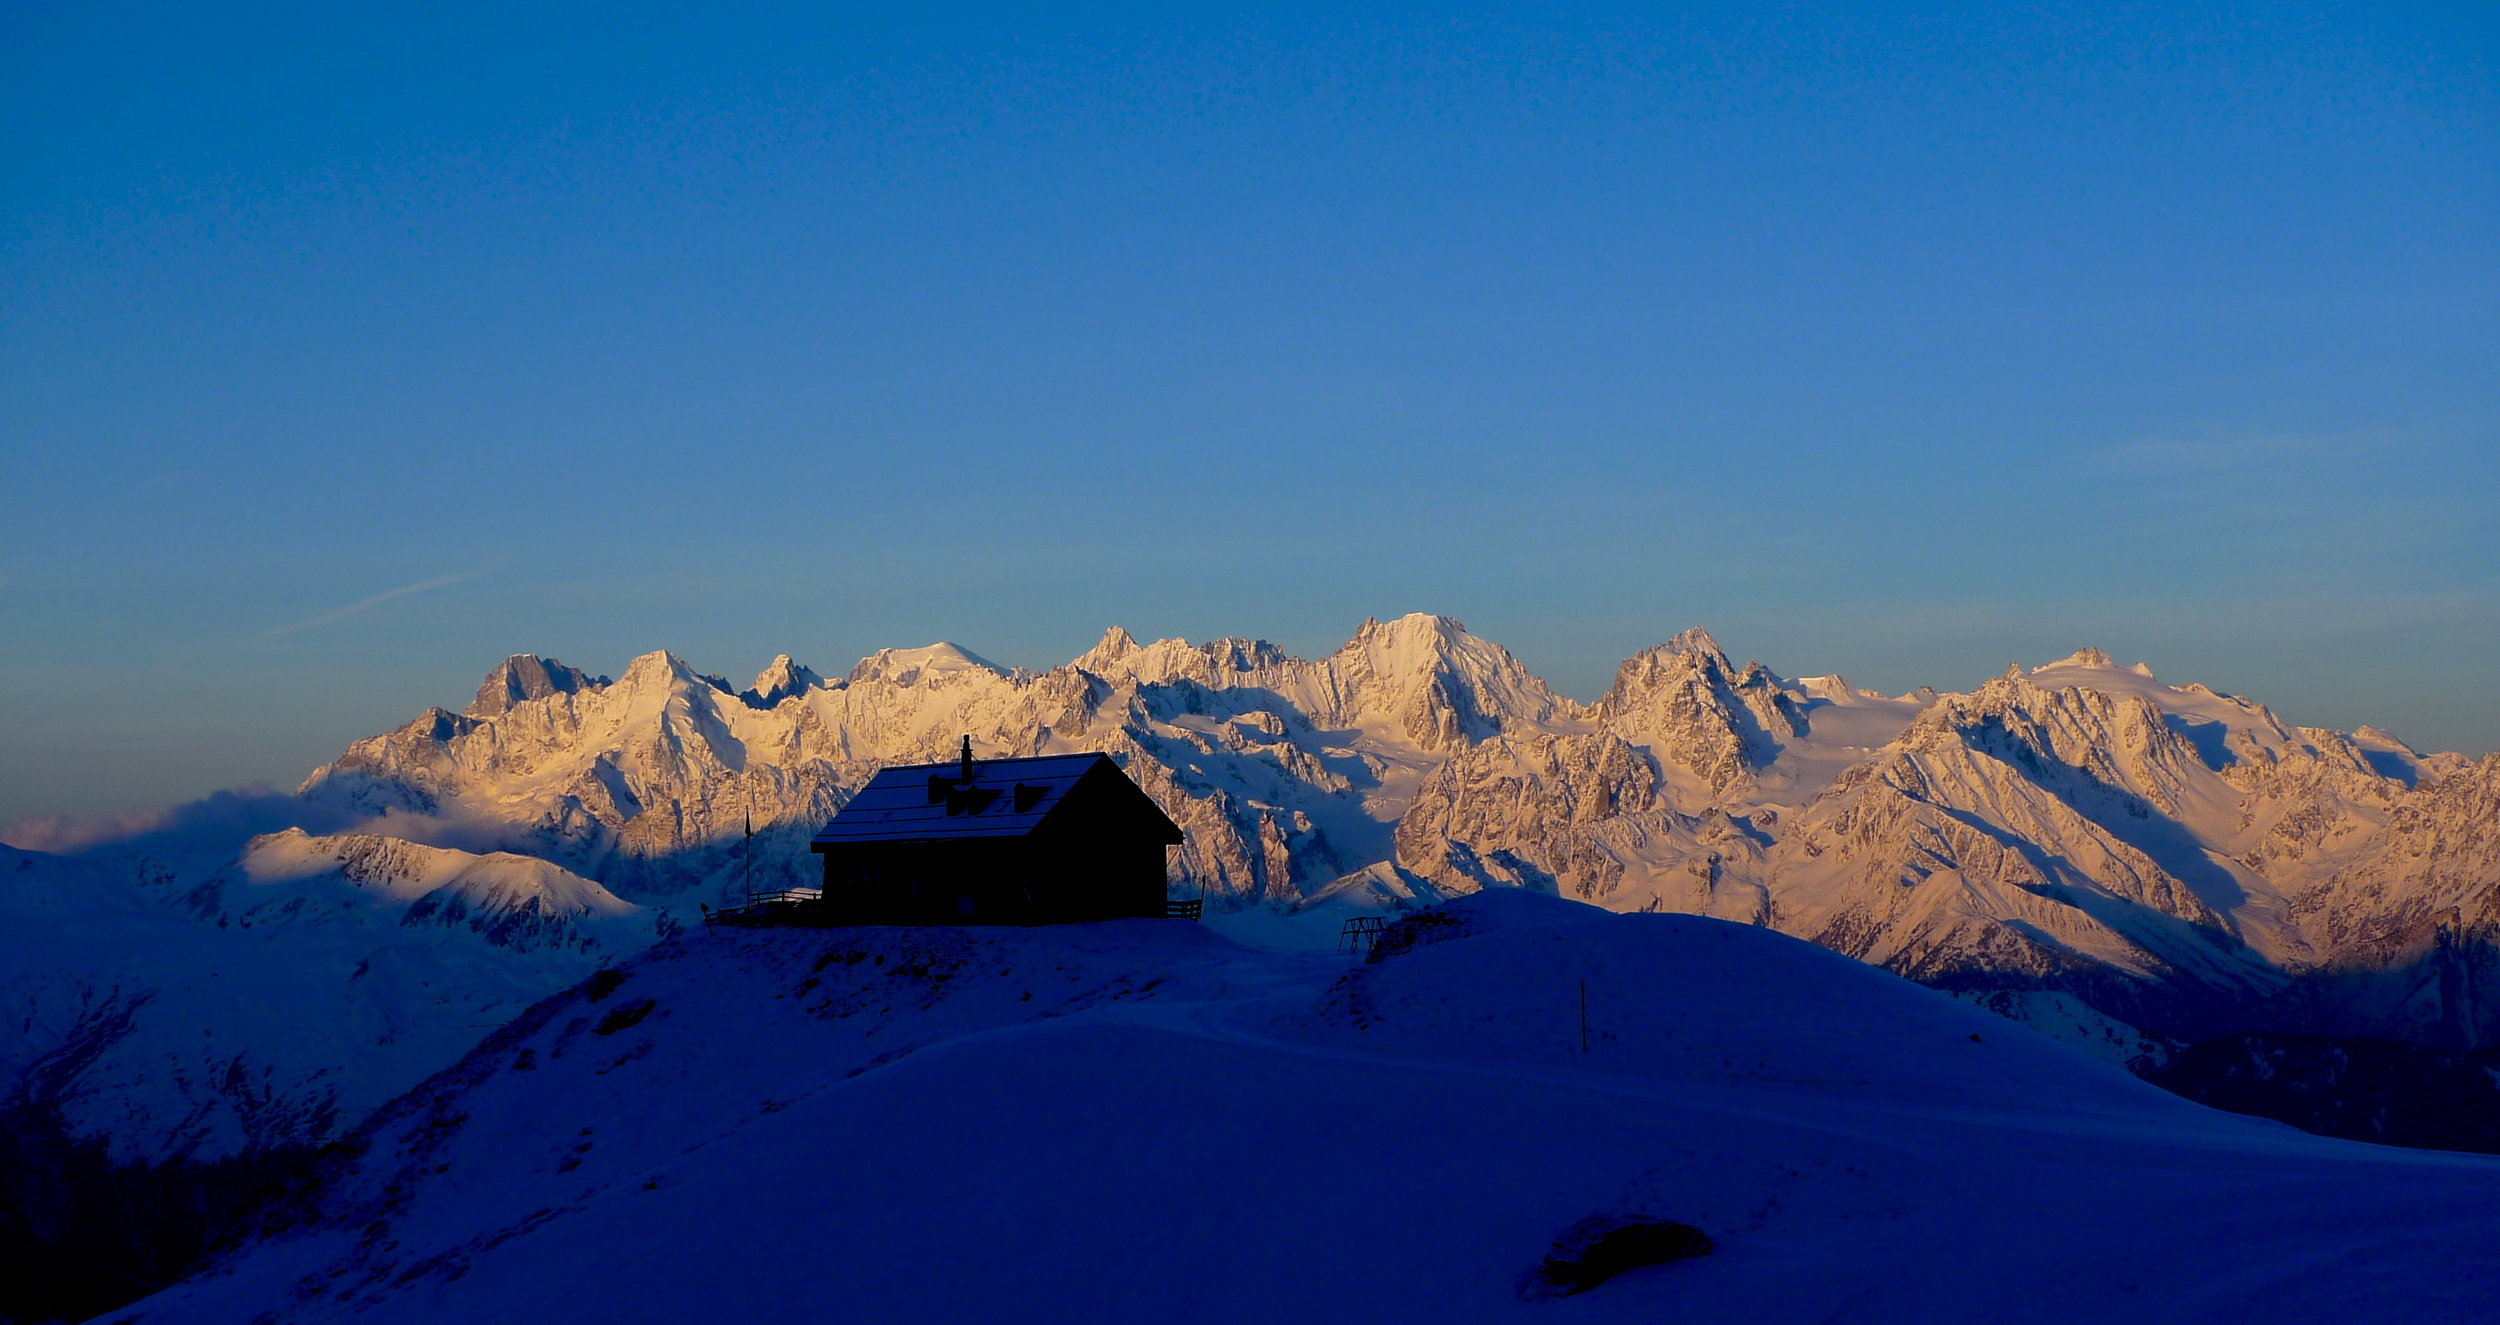 Day 3: Sunrise at the Mont Fort Hut